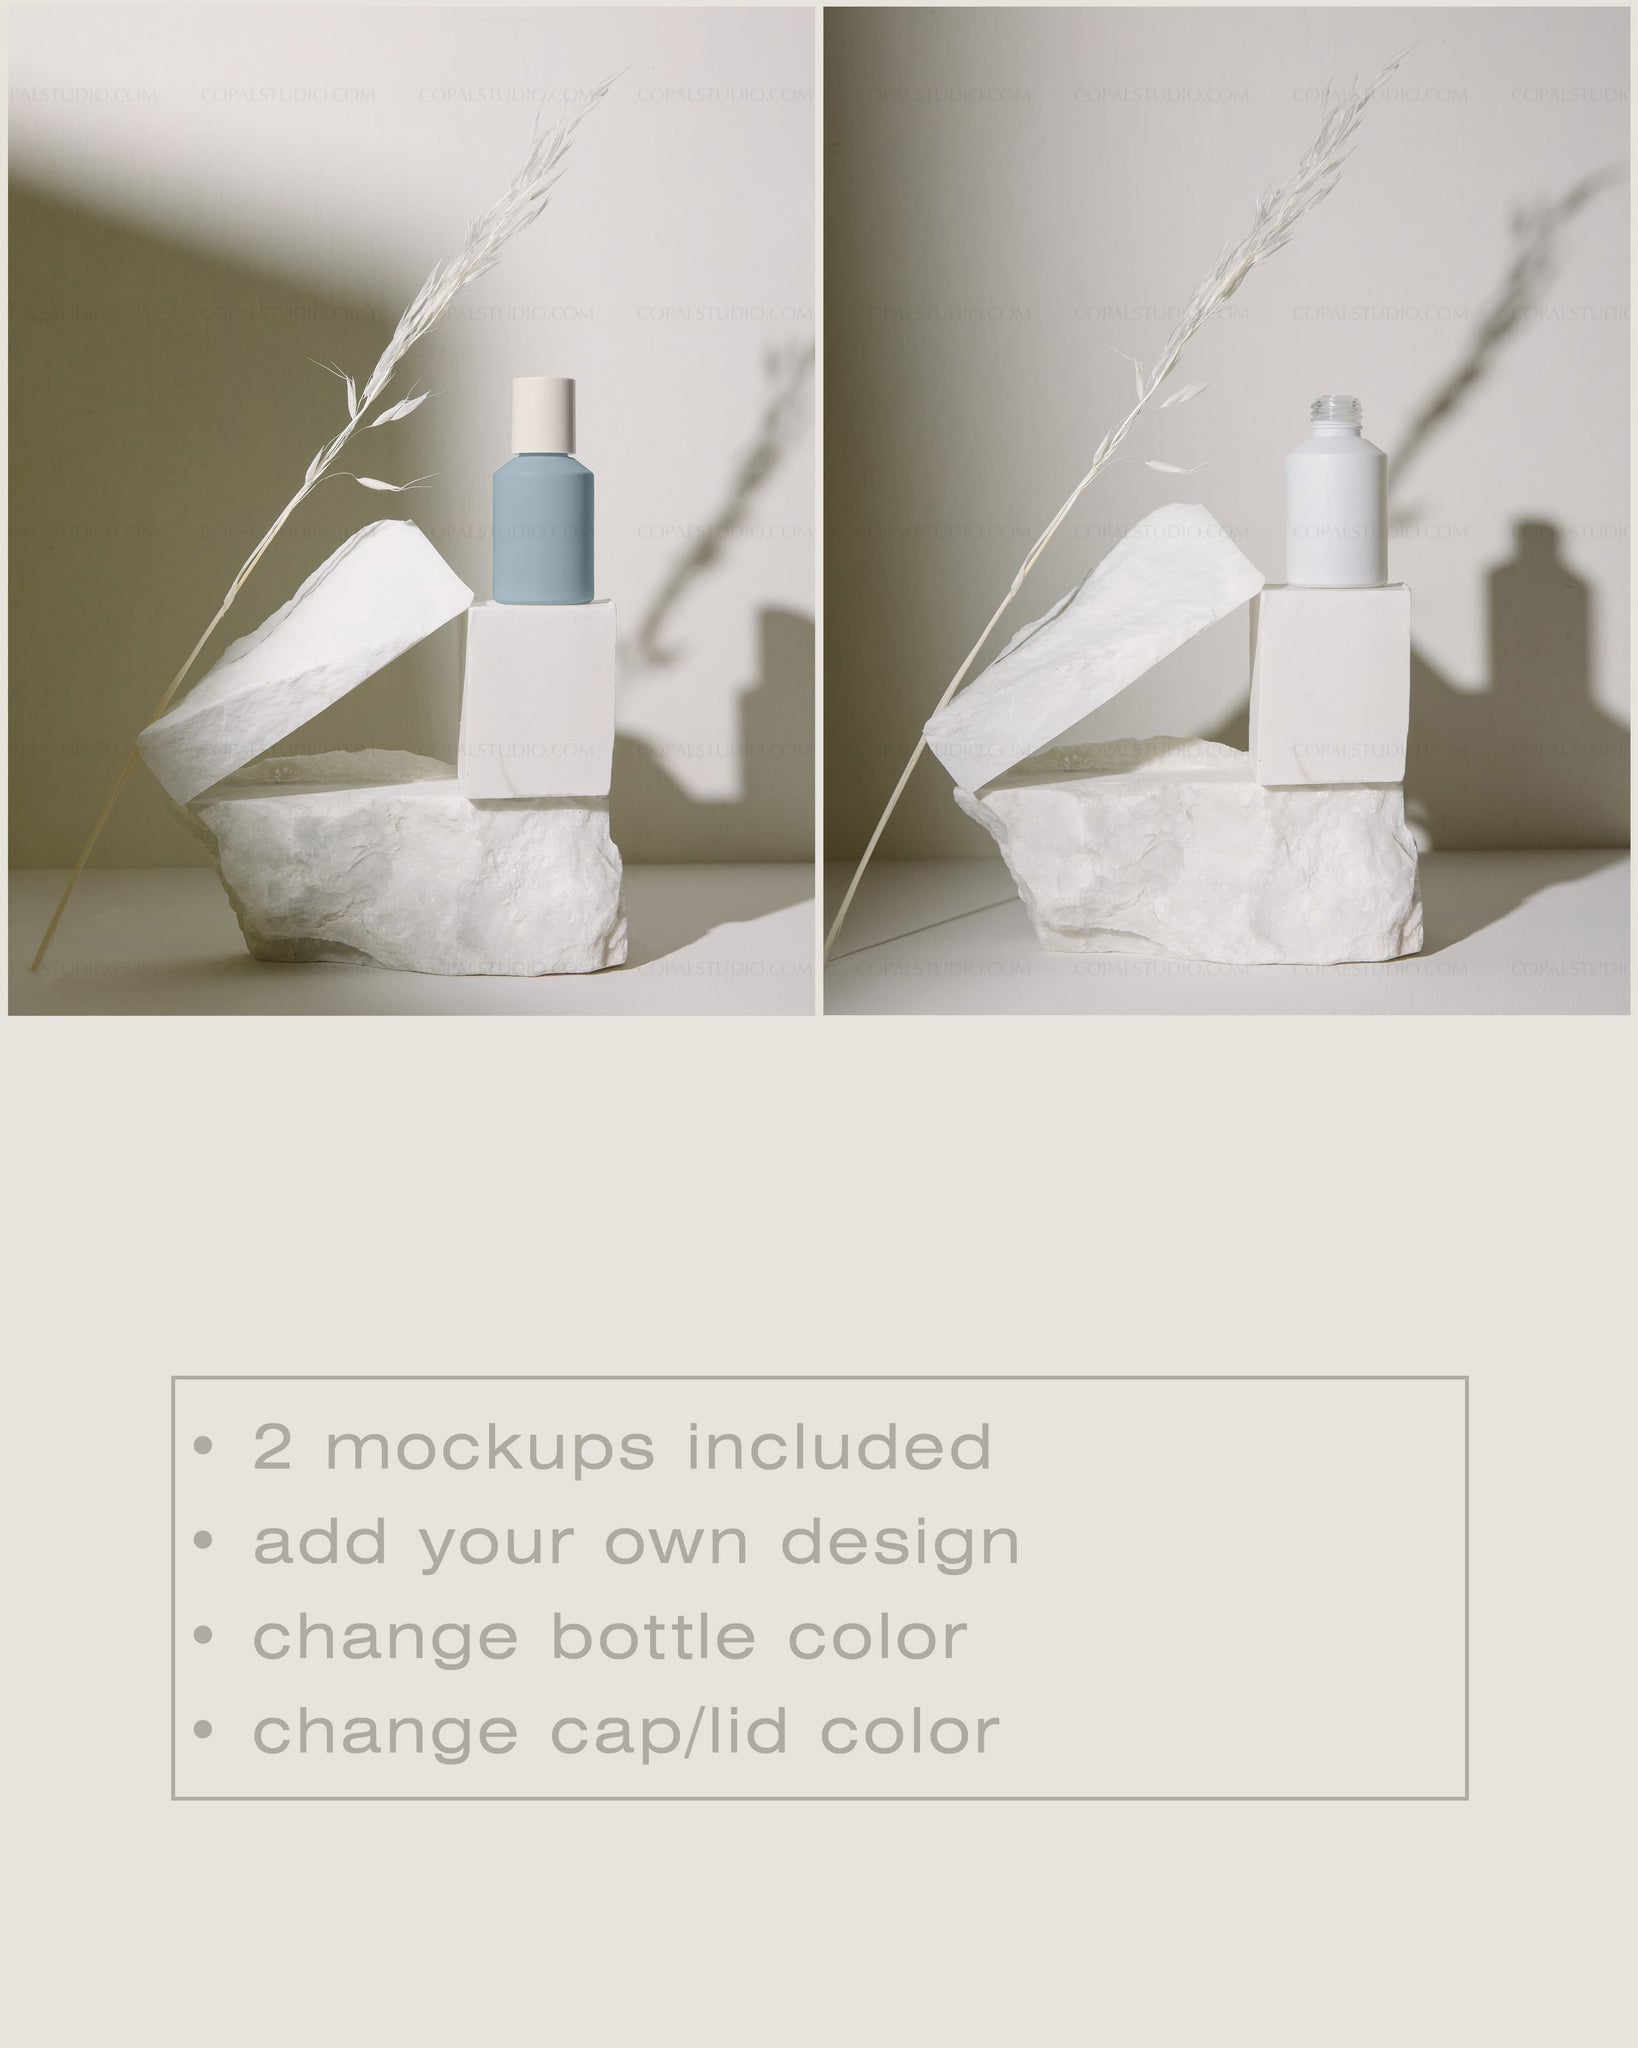 Round Cosmetic Bottle Mockup No. 4 - Copal Studio Packaging Mockups For Designers